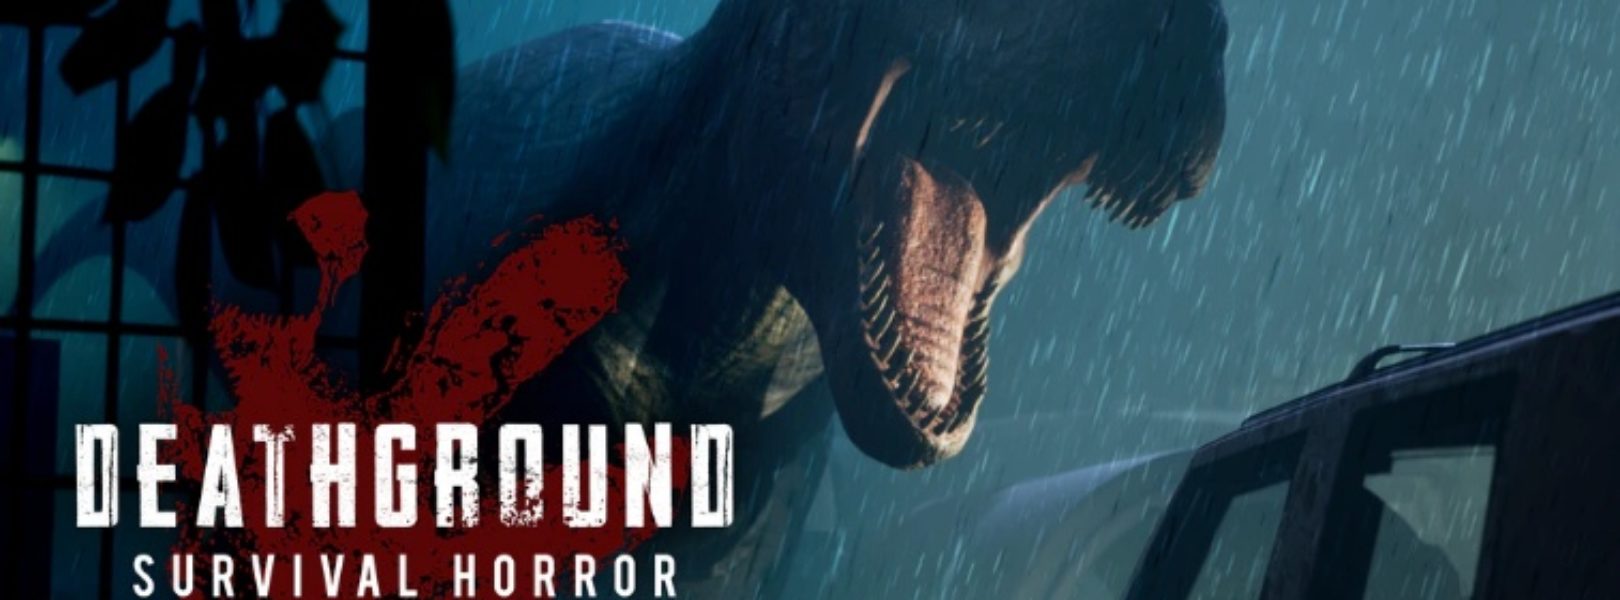 Deathground - A Dinosaur Survival Horror Game by Jaw Drop Games